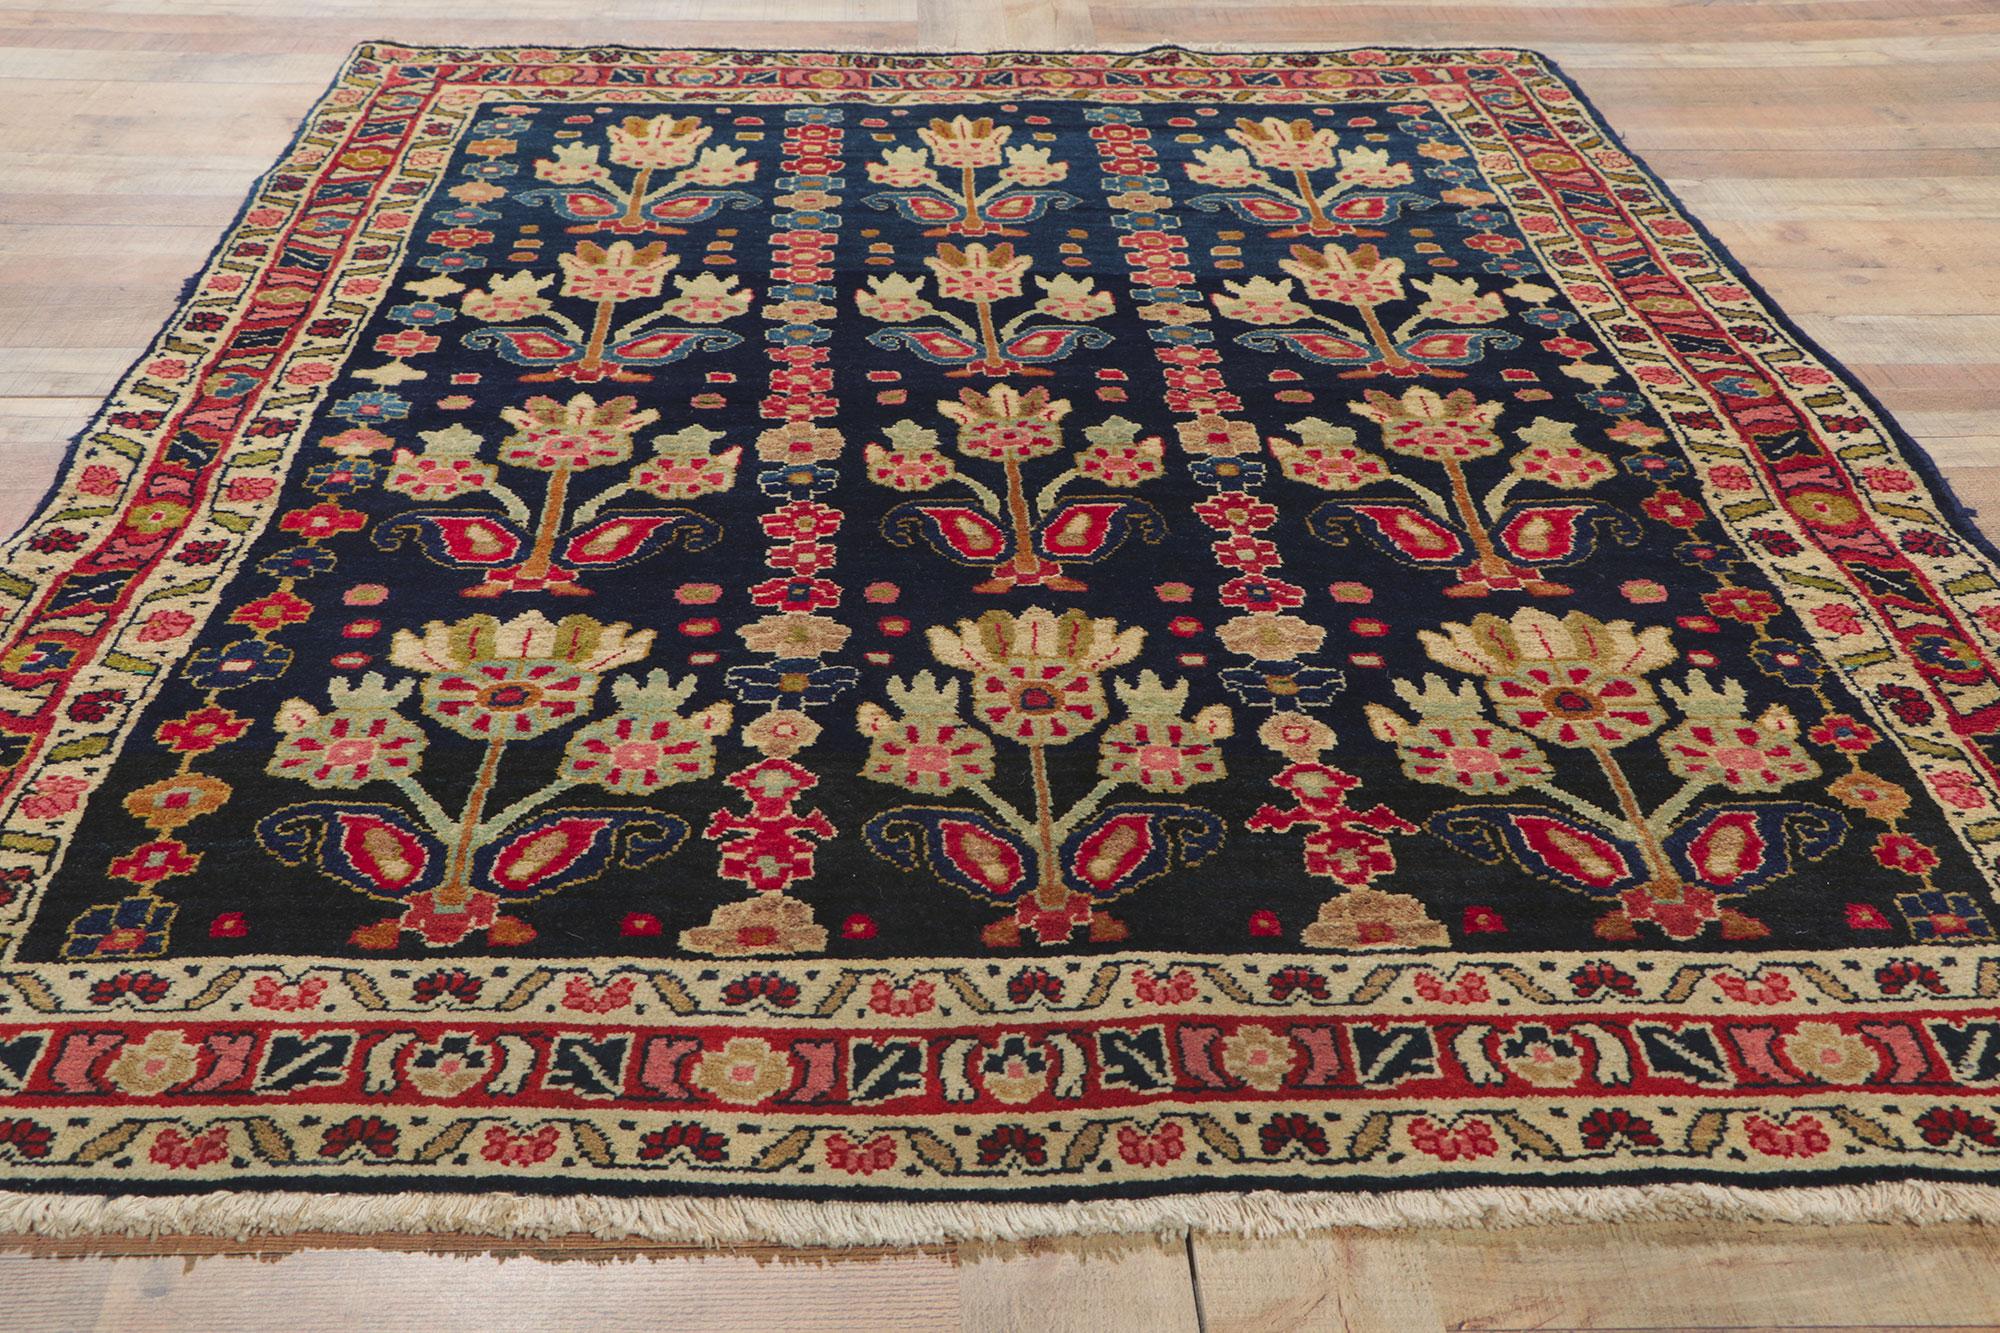 Wool Antique Persian Mahal Rug, Timeless Elegance Meets Cultivated Beauty